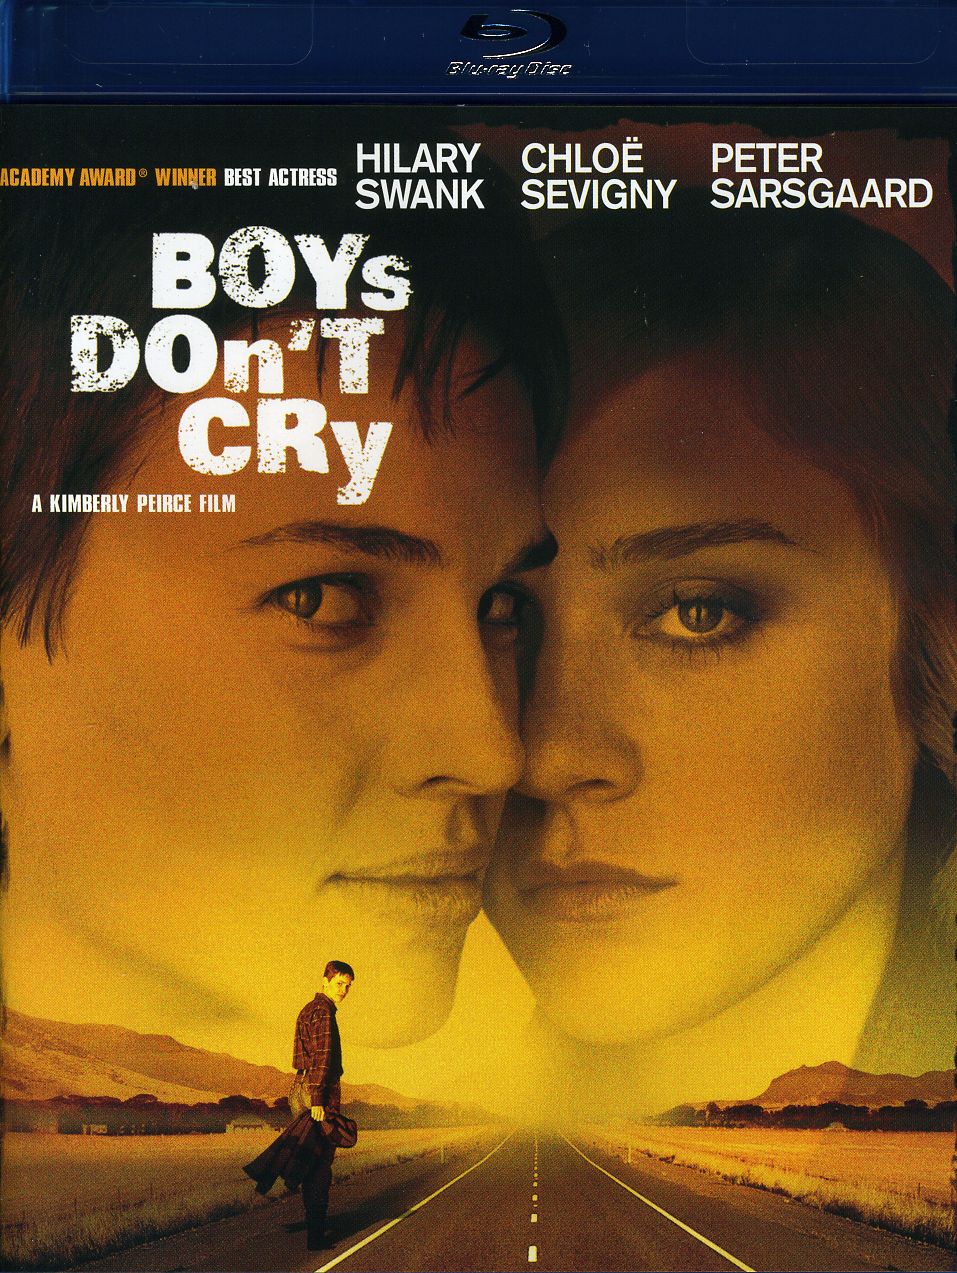 Watch Boys Don't Cry (1999) Online - Watch Full HD Movies Online Free